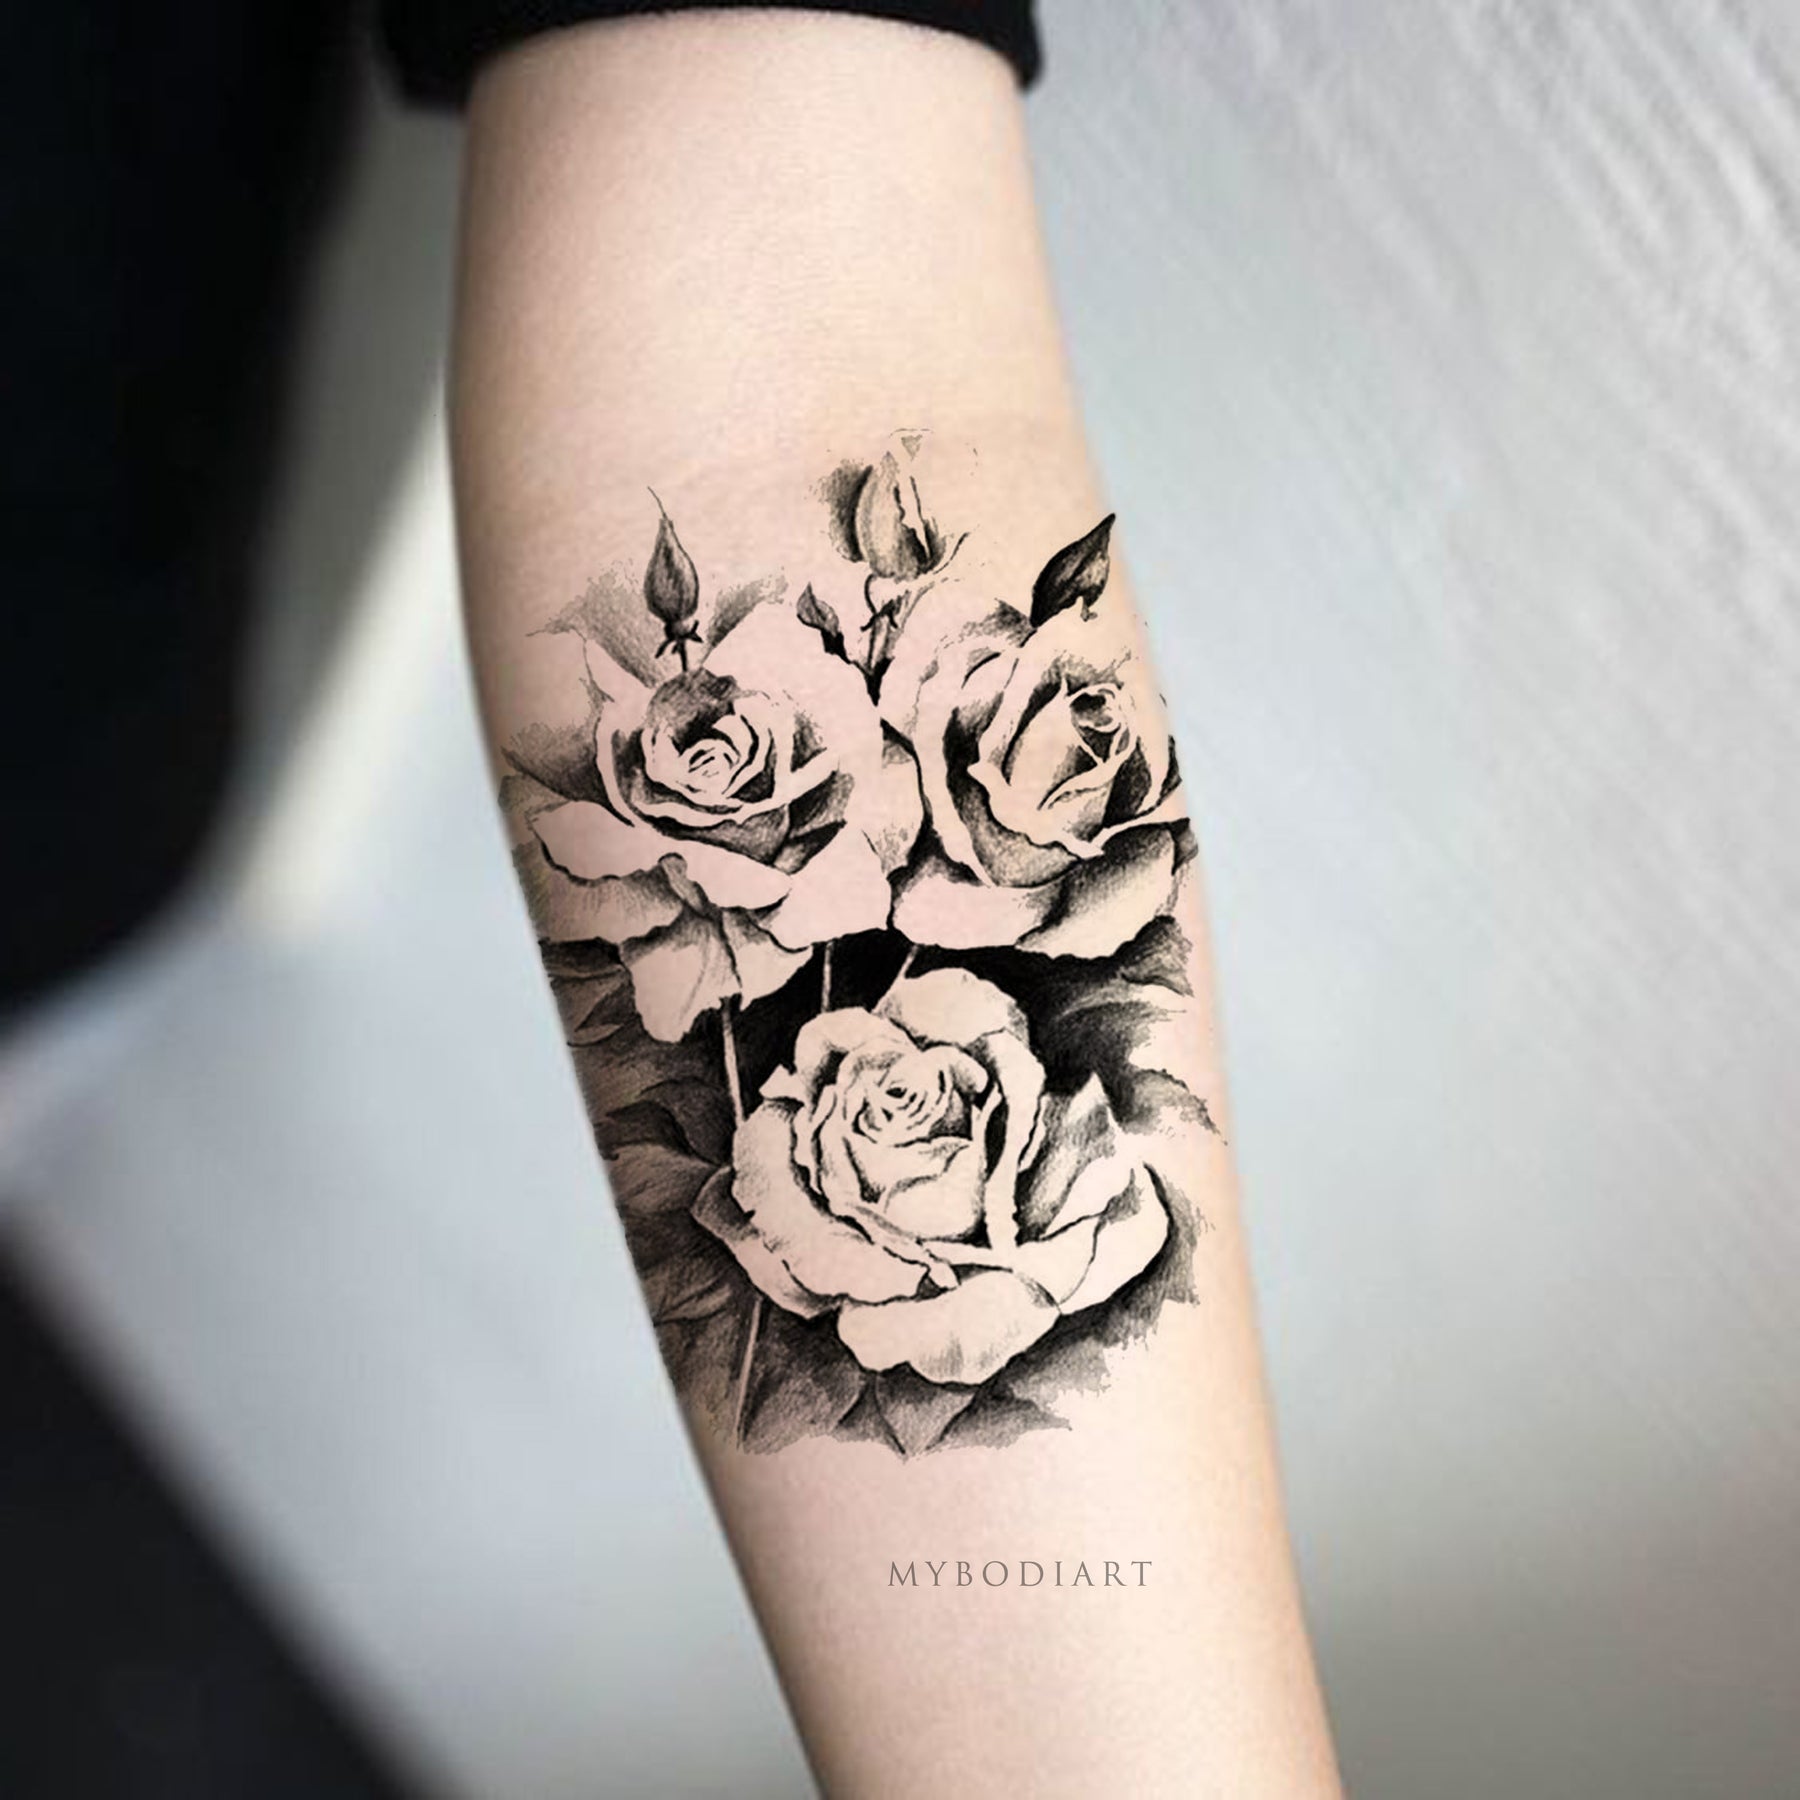 Black and white floral flower temporary tattoo set